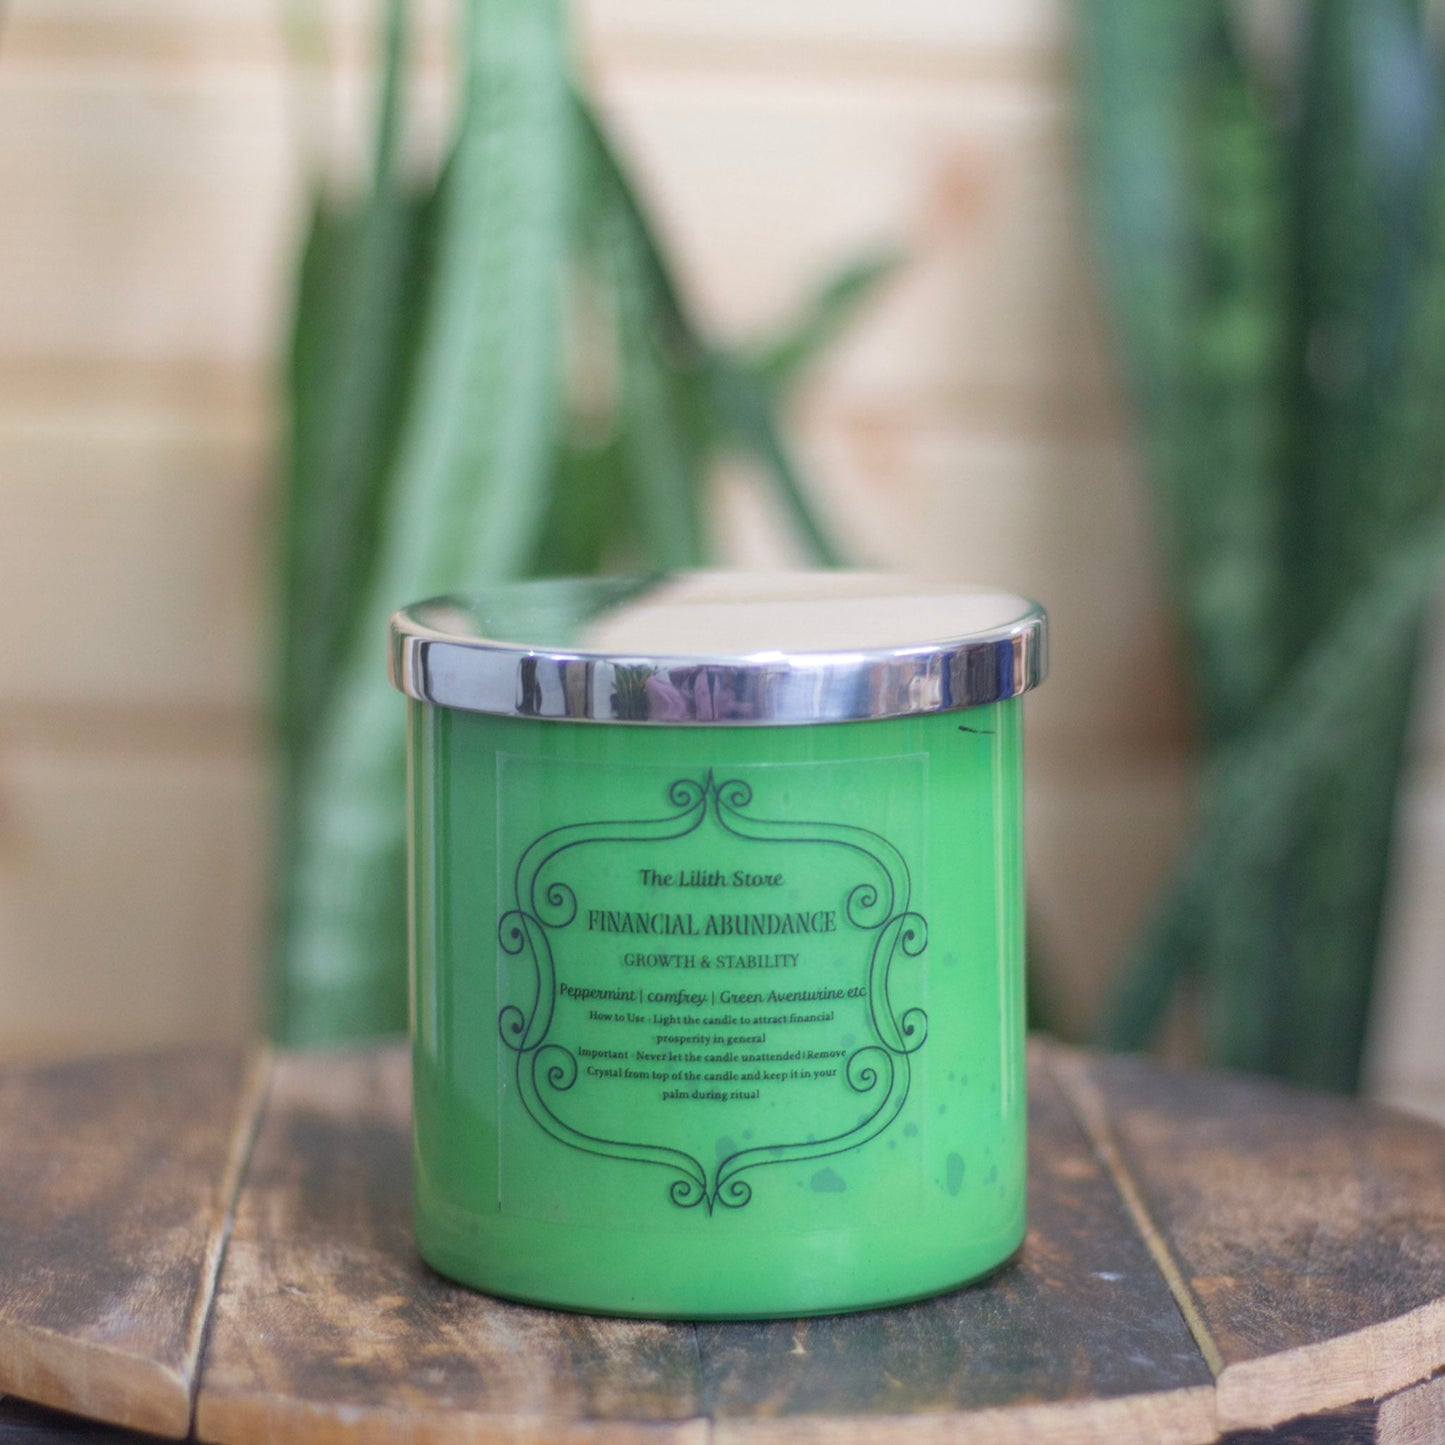 Financial Abundance - Growth & Stability Intention Candle | Ritual